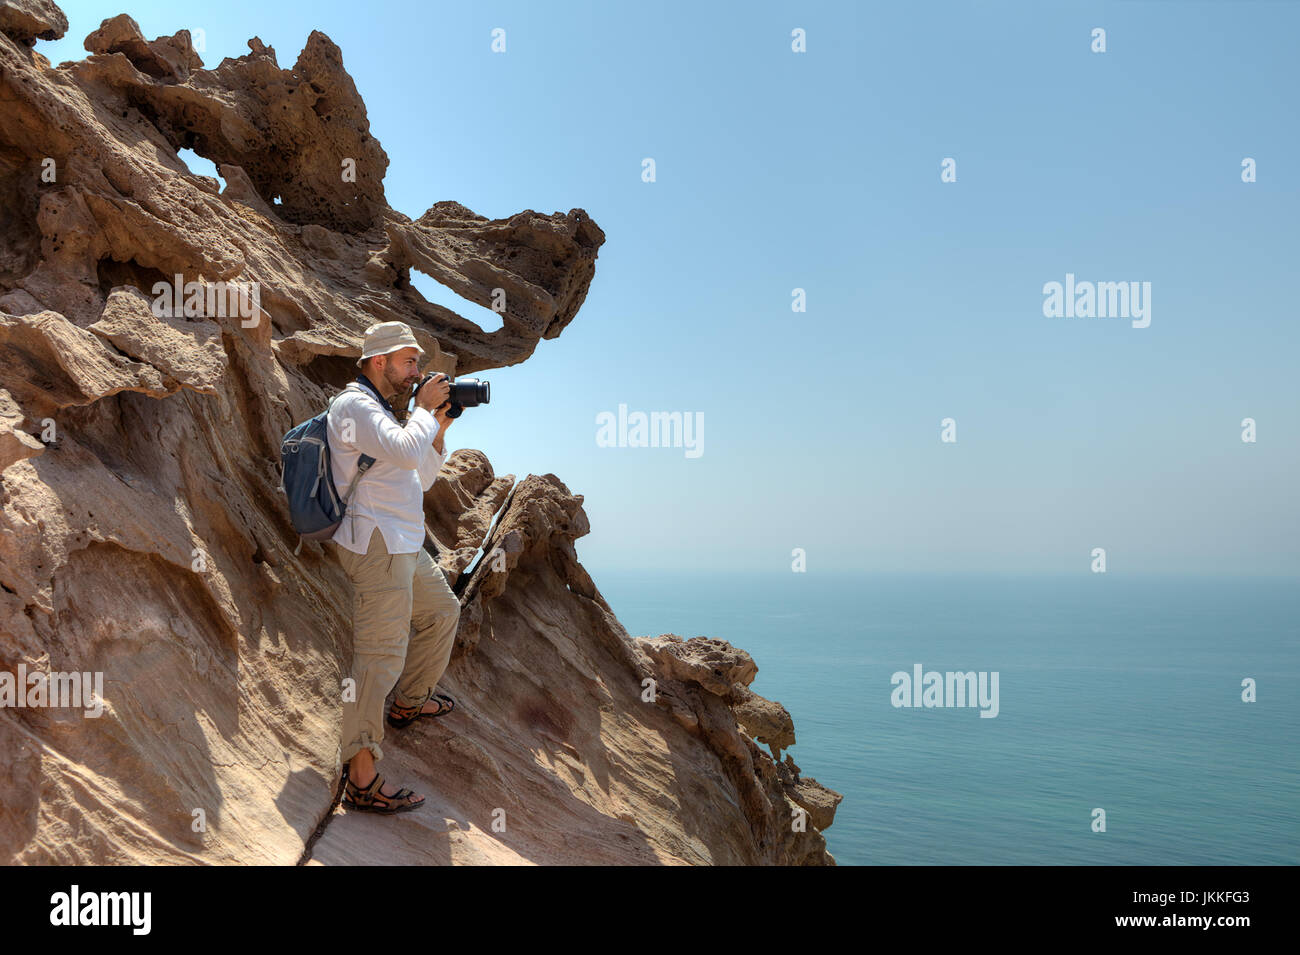 Photographer traveler stands on rock in Hormoz Island, southern Iran. Stock Photo